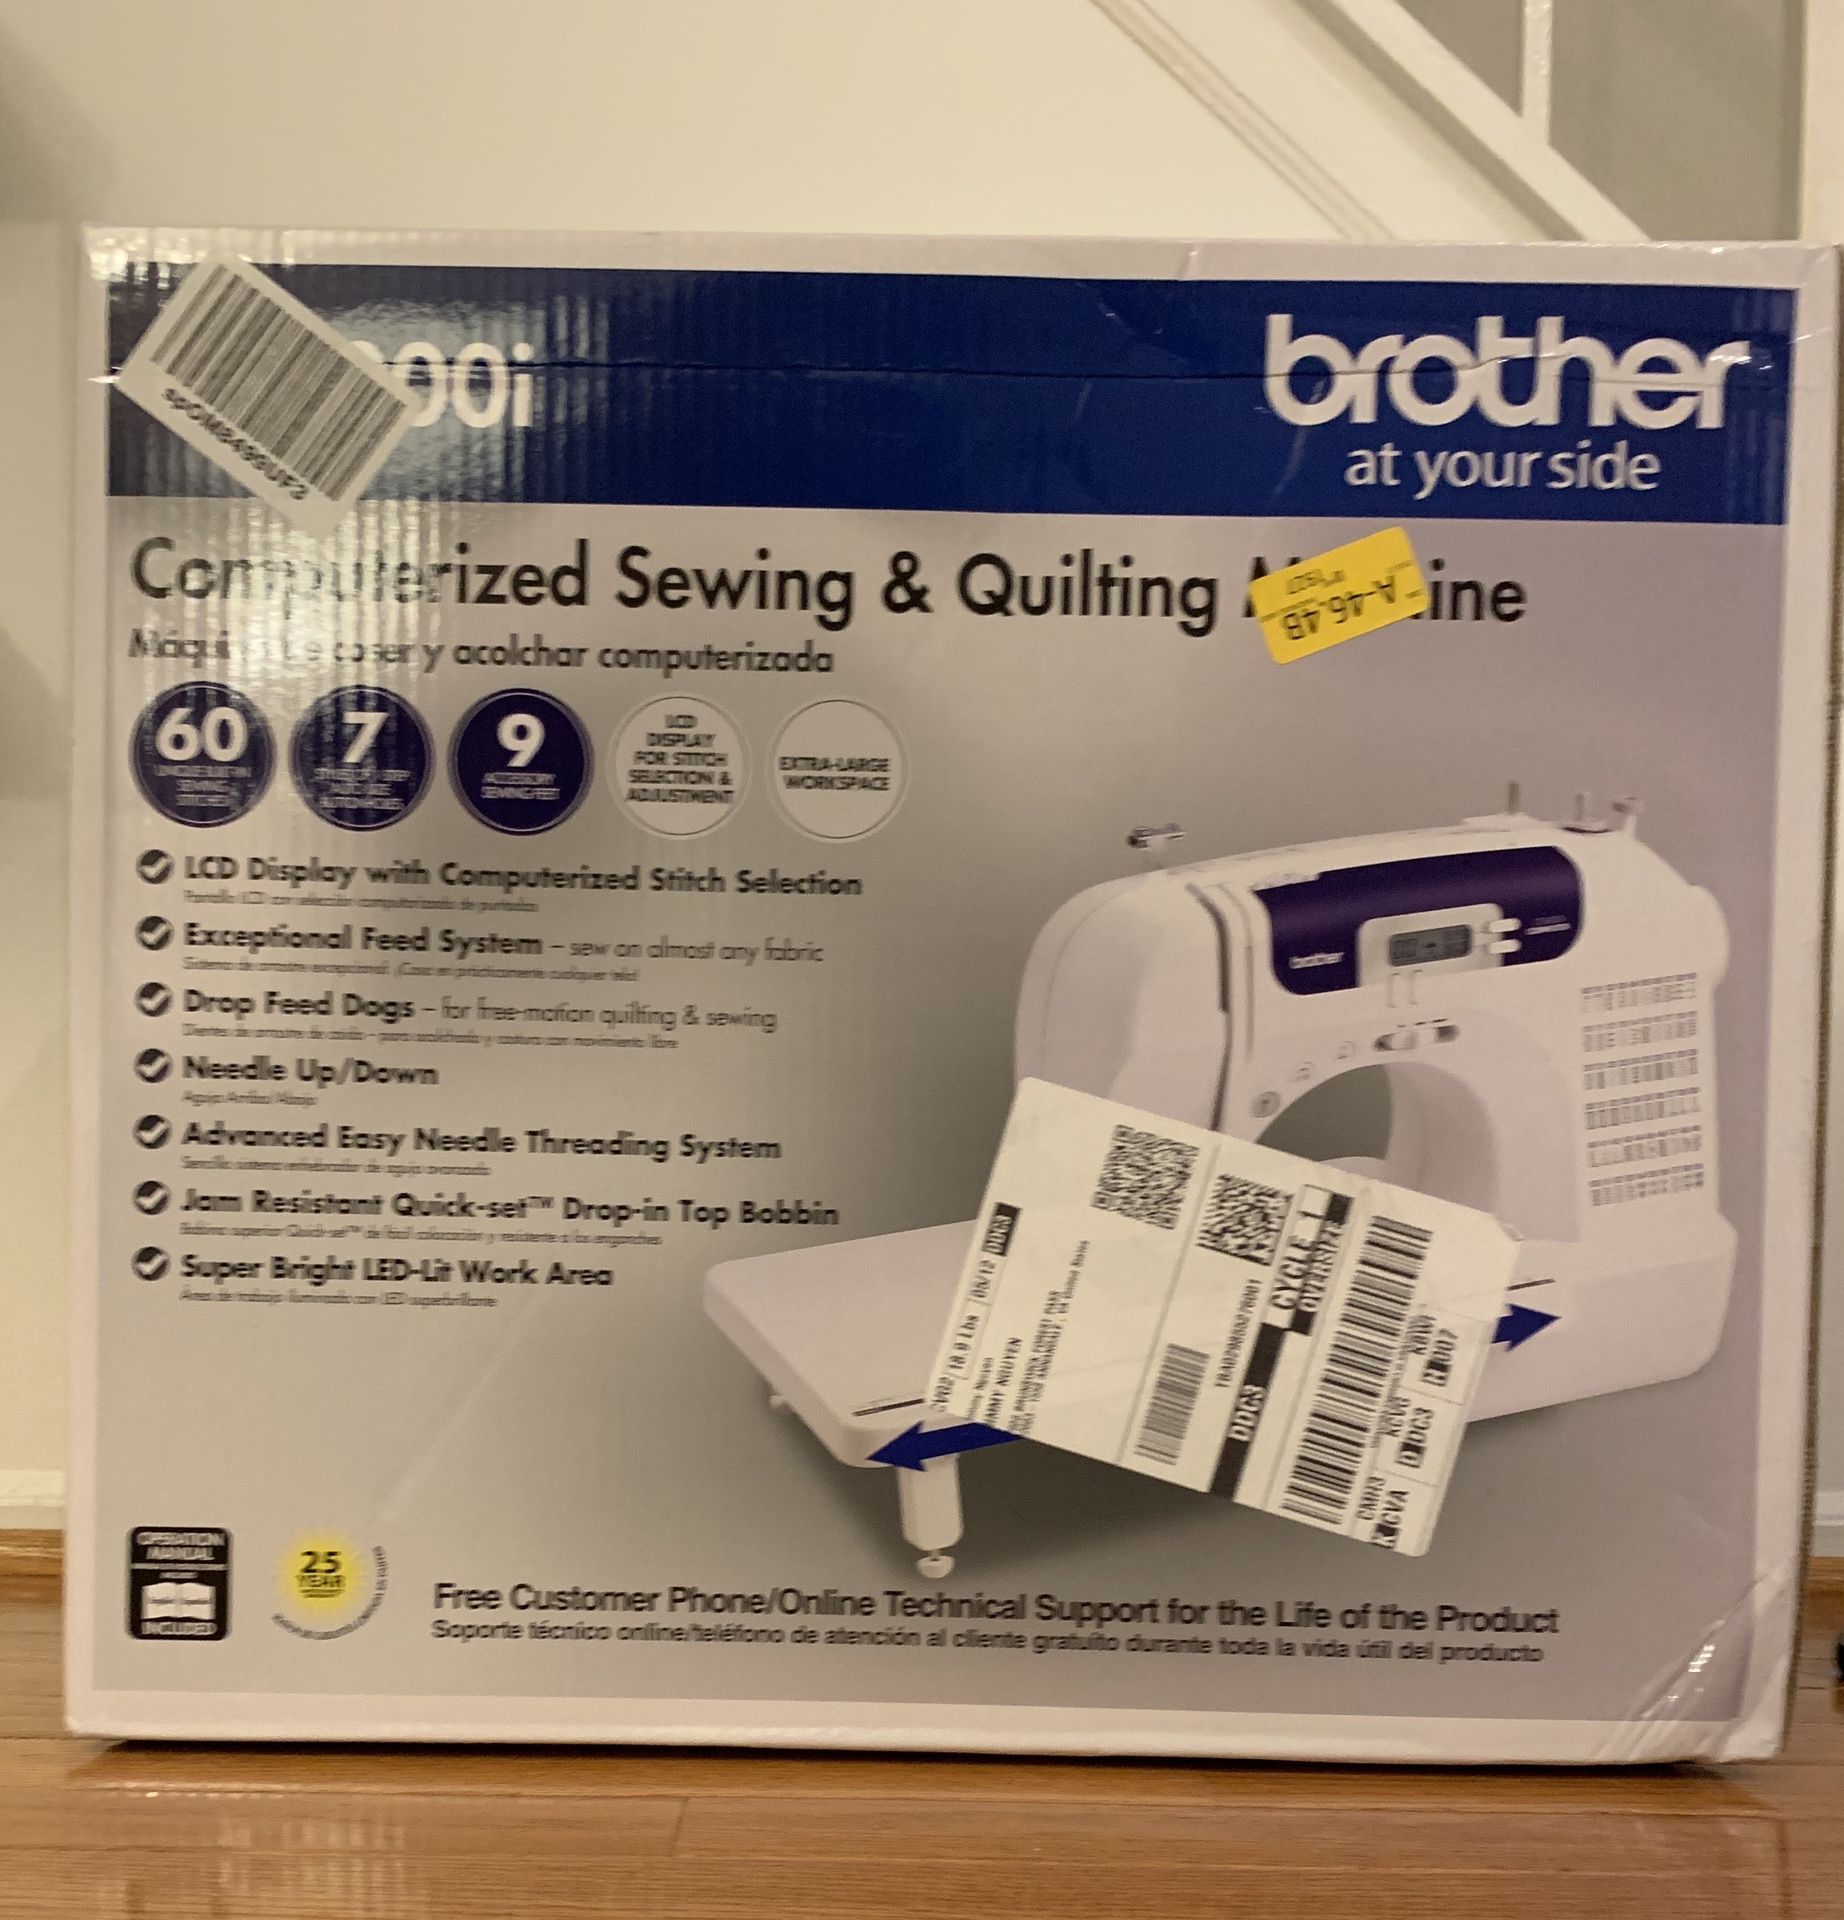 New Brother Computerized Sewing and Quilting Machine CS6000i